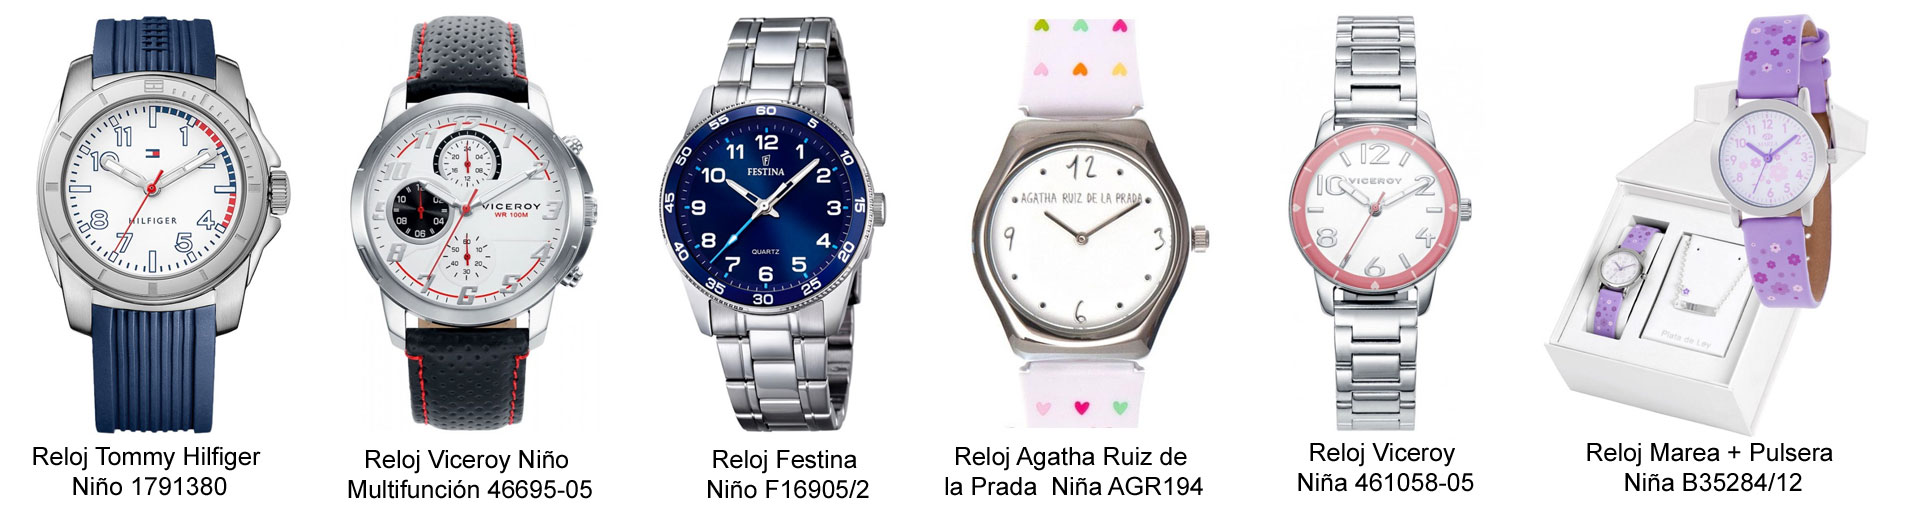 relojes-casuales